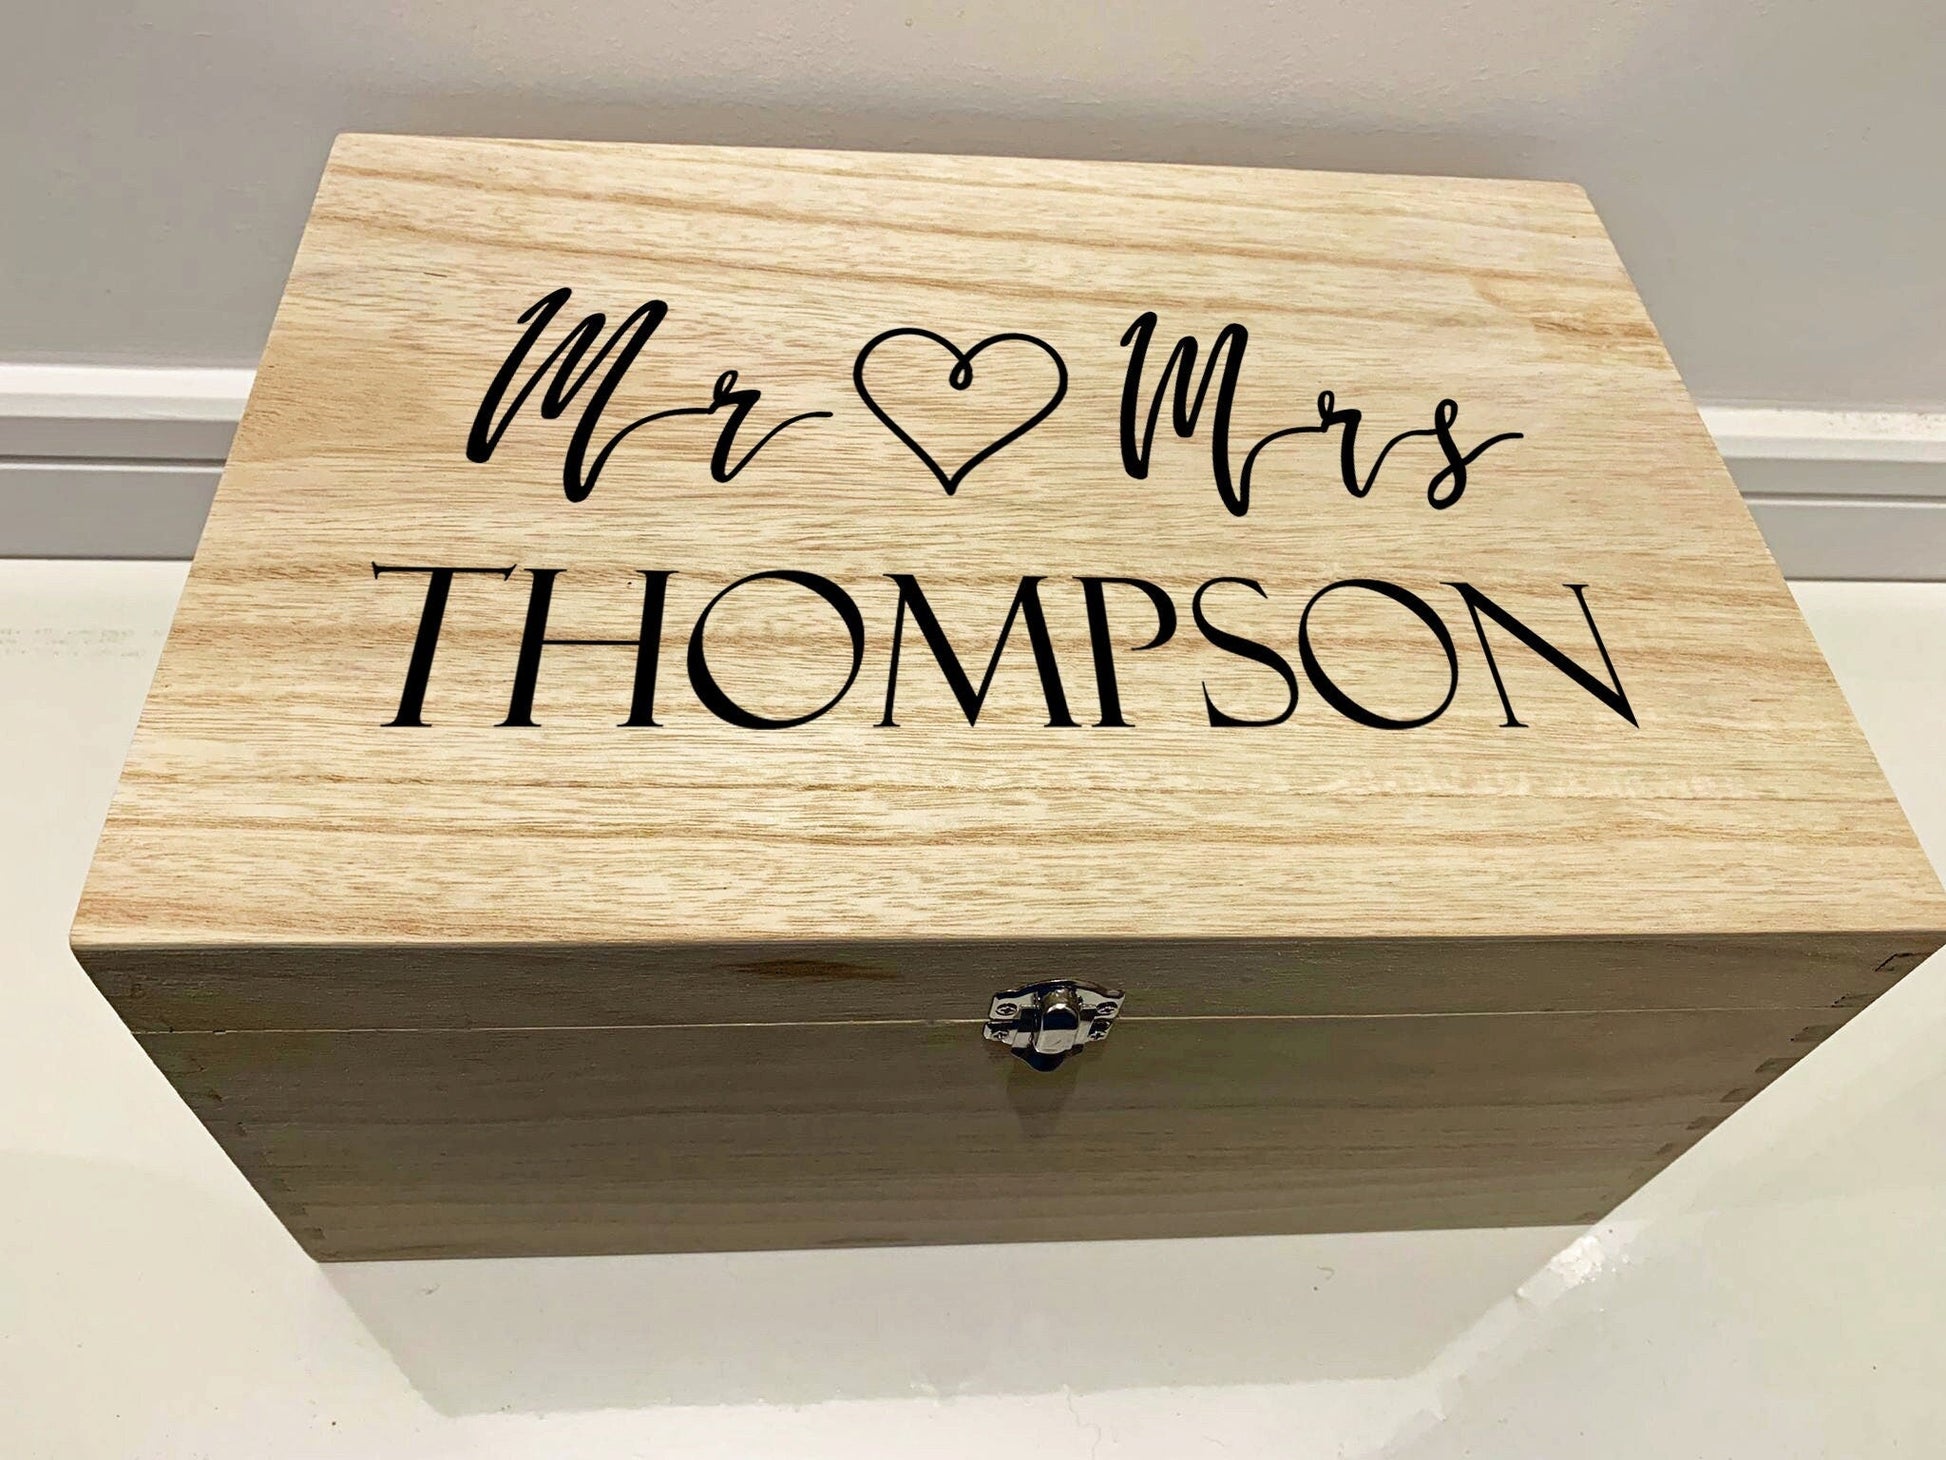 Large Personalised Engraved Wooden Mr and Mrs Keepsake Box with Heart - Resplendent Aurora